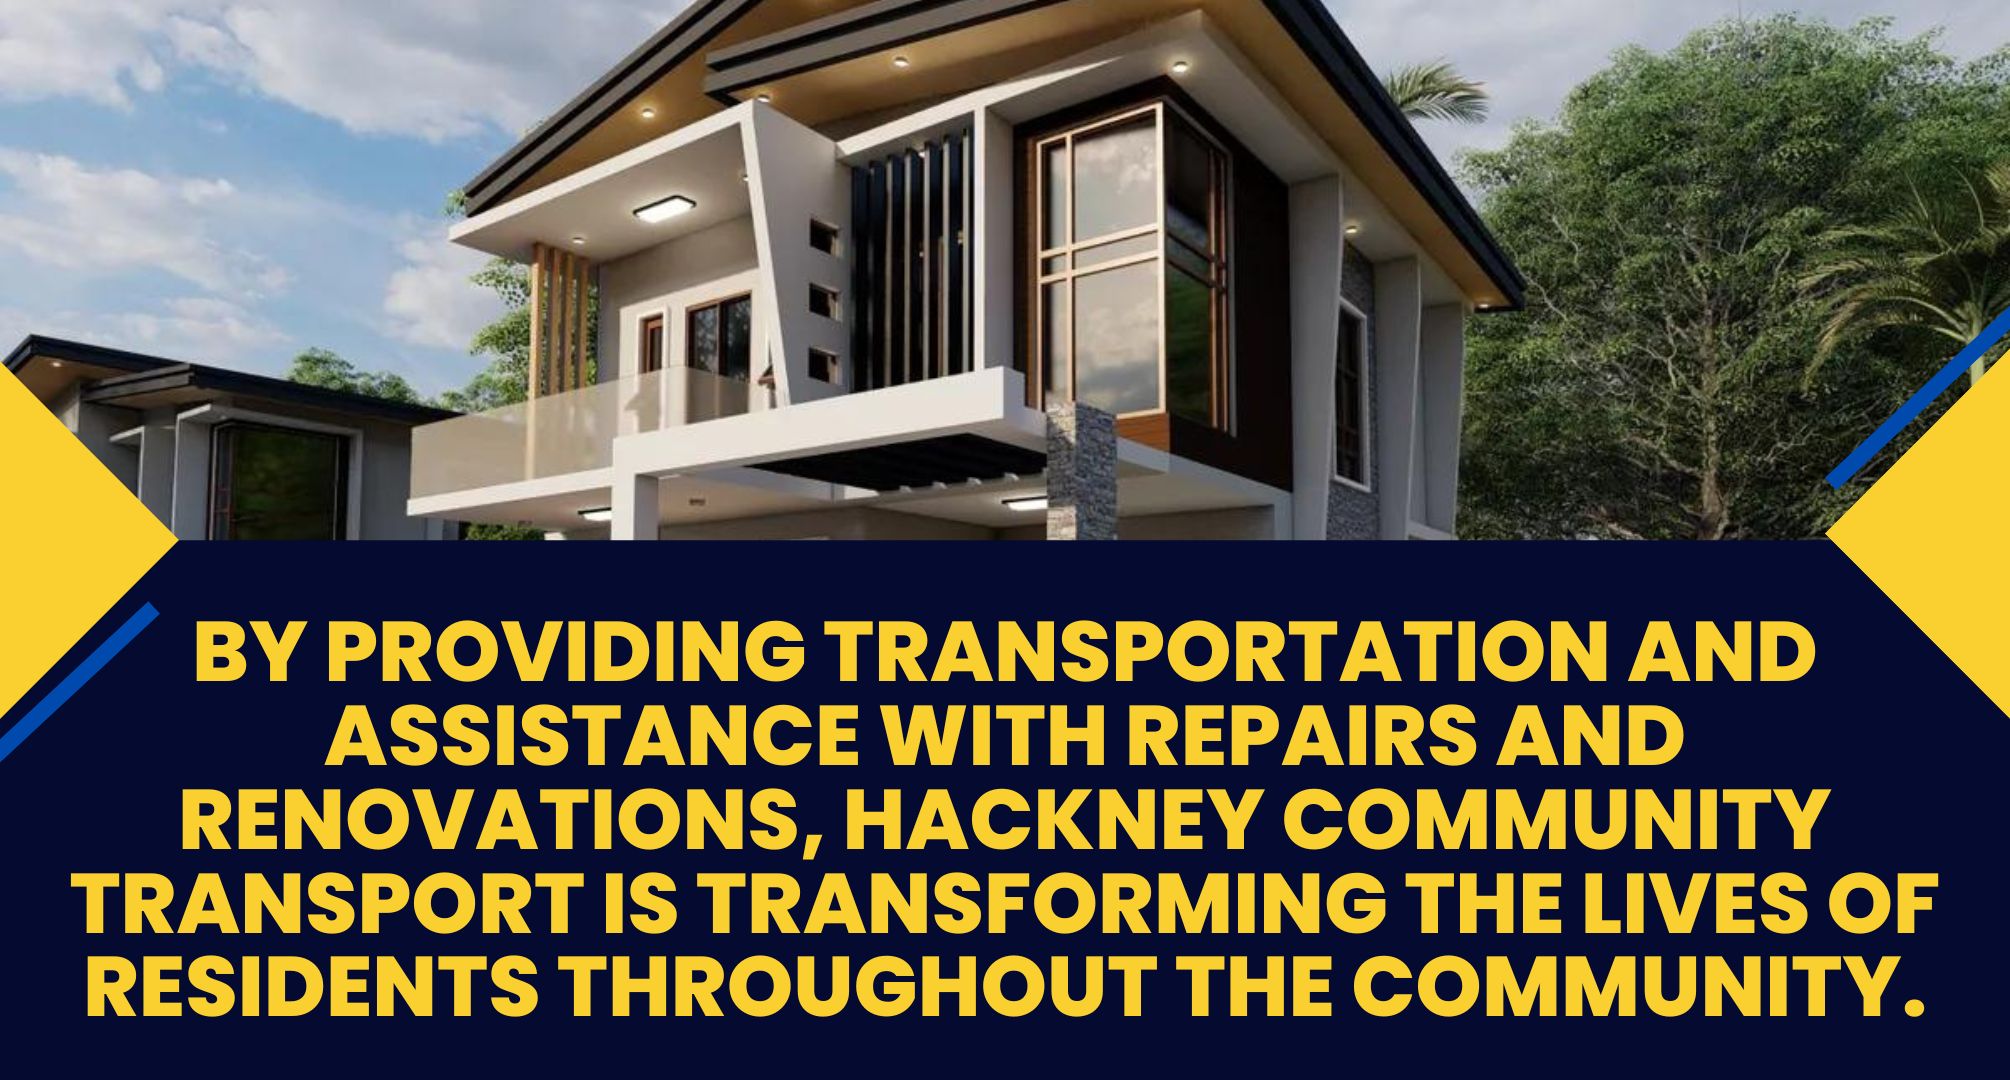 From Transit to Transformation How Hackney Community Transport is Changing Lives through Home Improvement